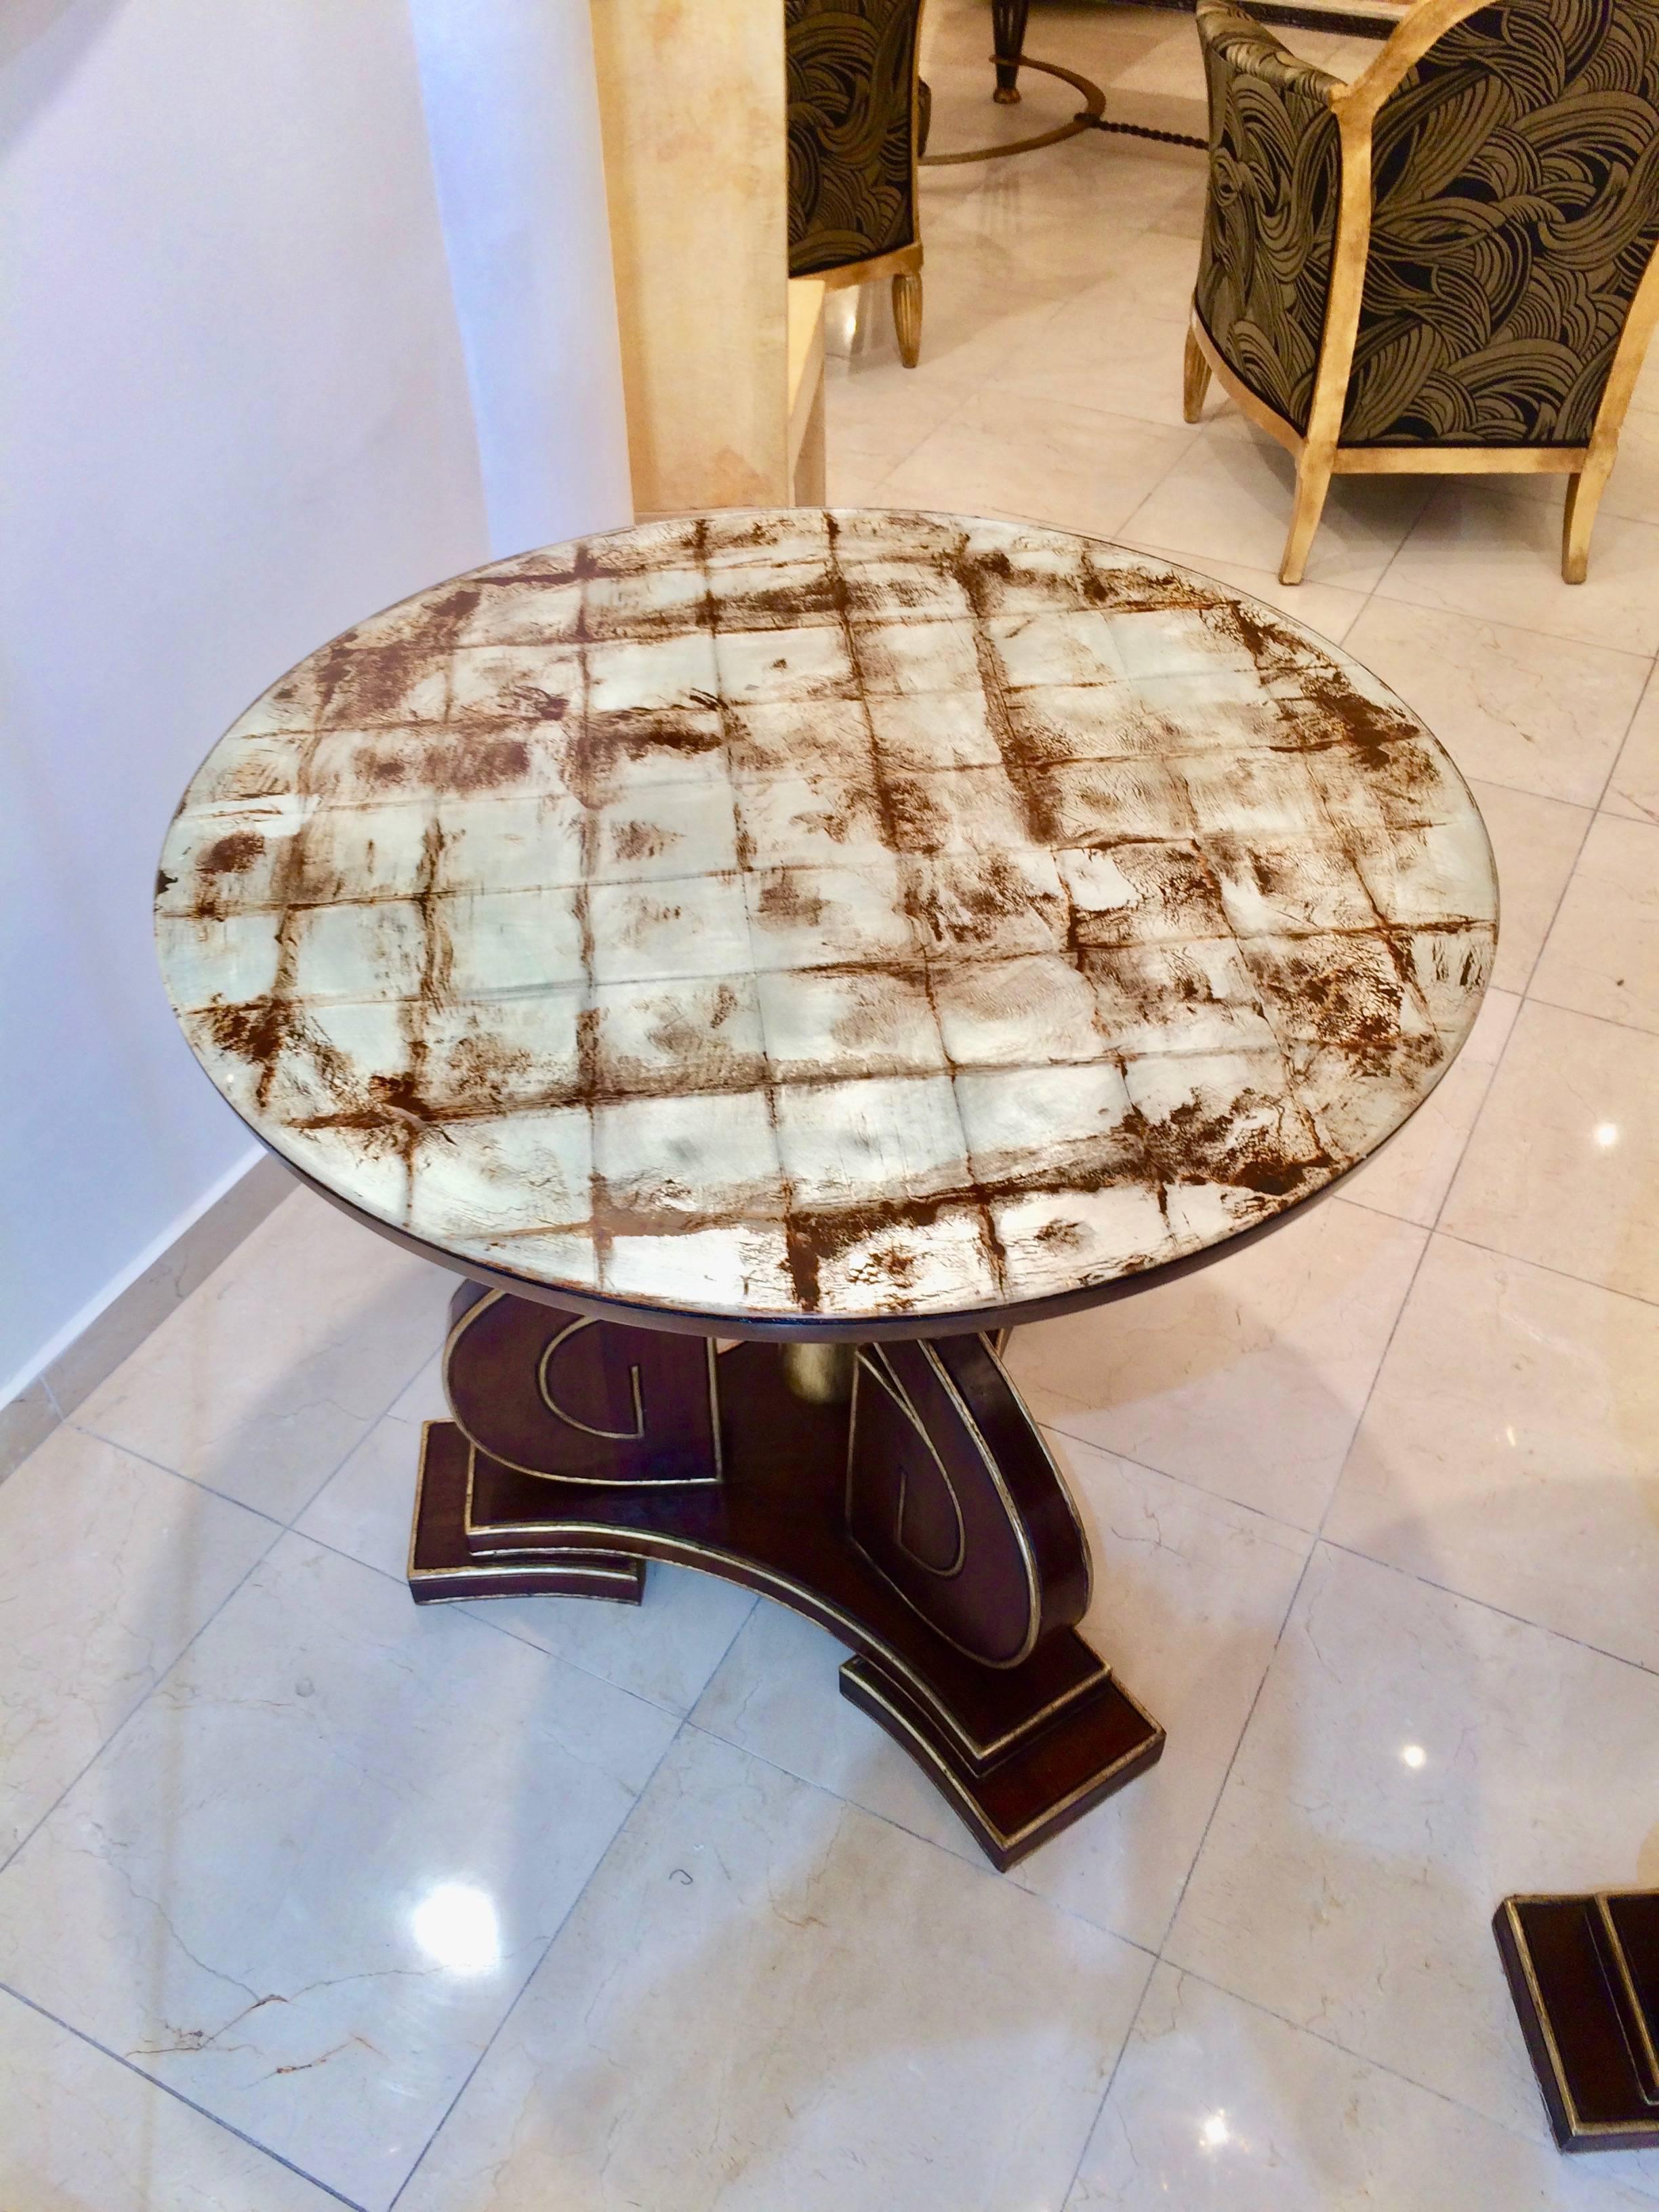 Extraordinary pair of 1940s tables in dark walnut and silver leaf.
The glass top present a silver leaf patina.